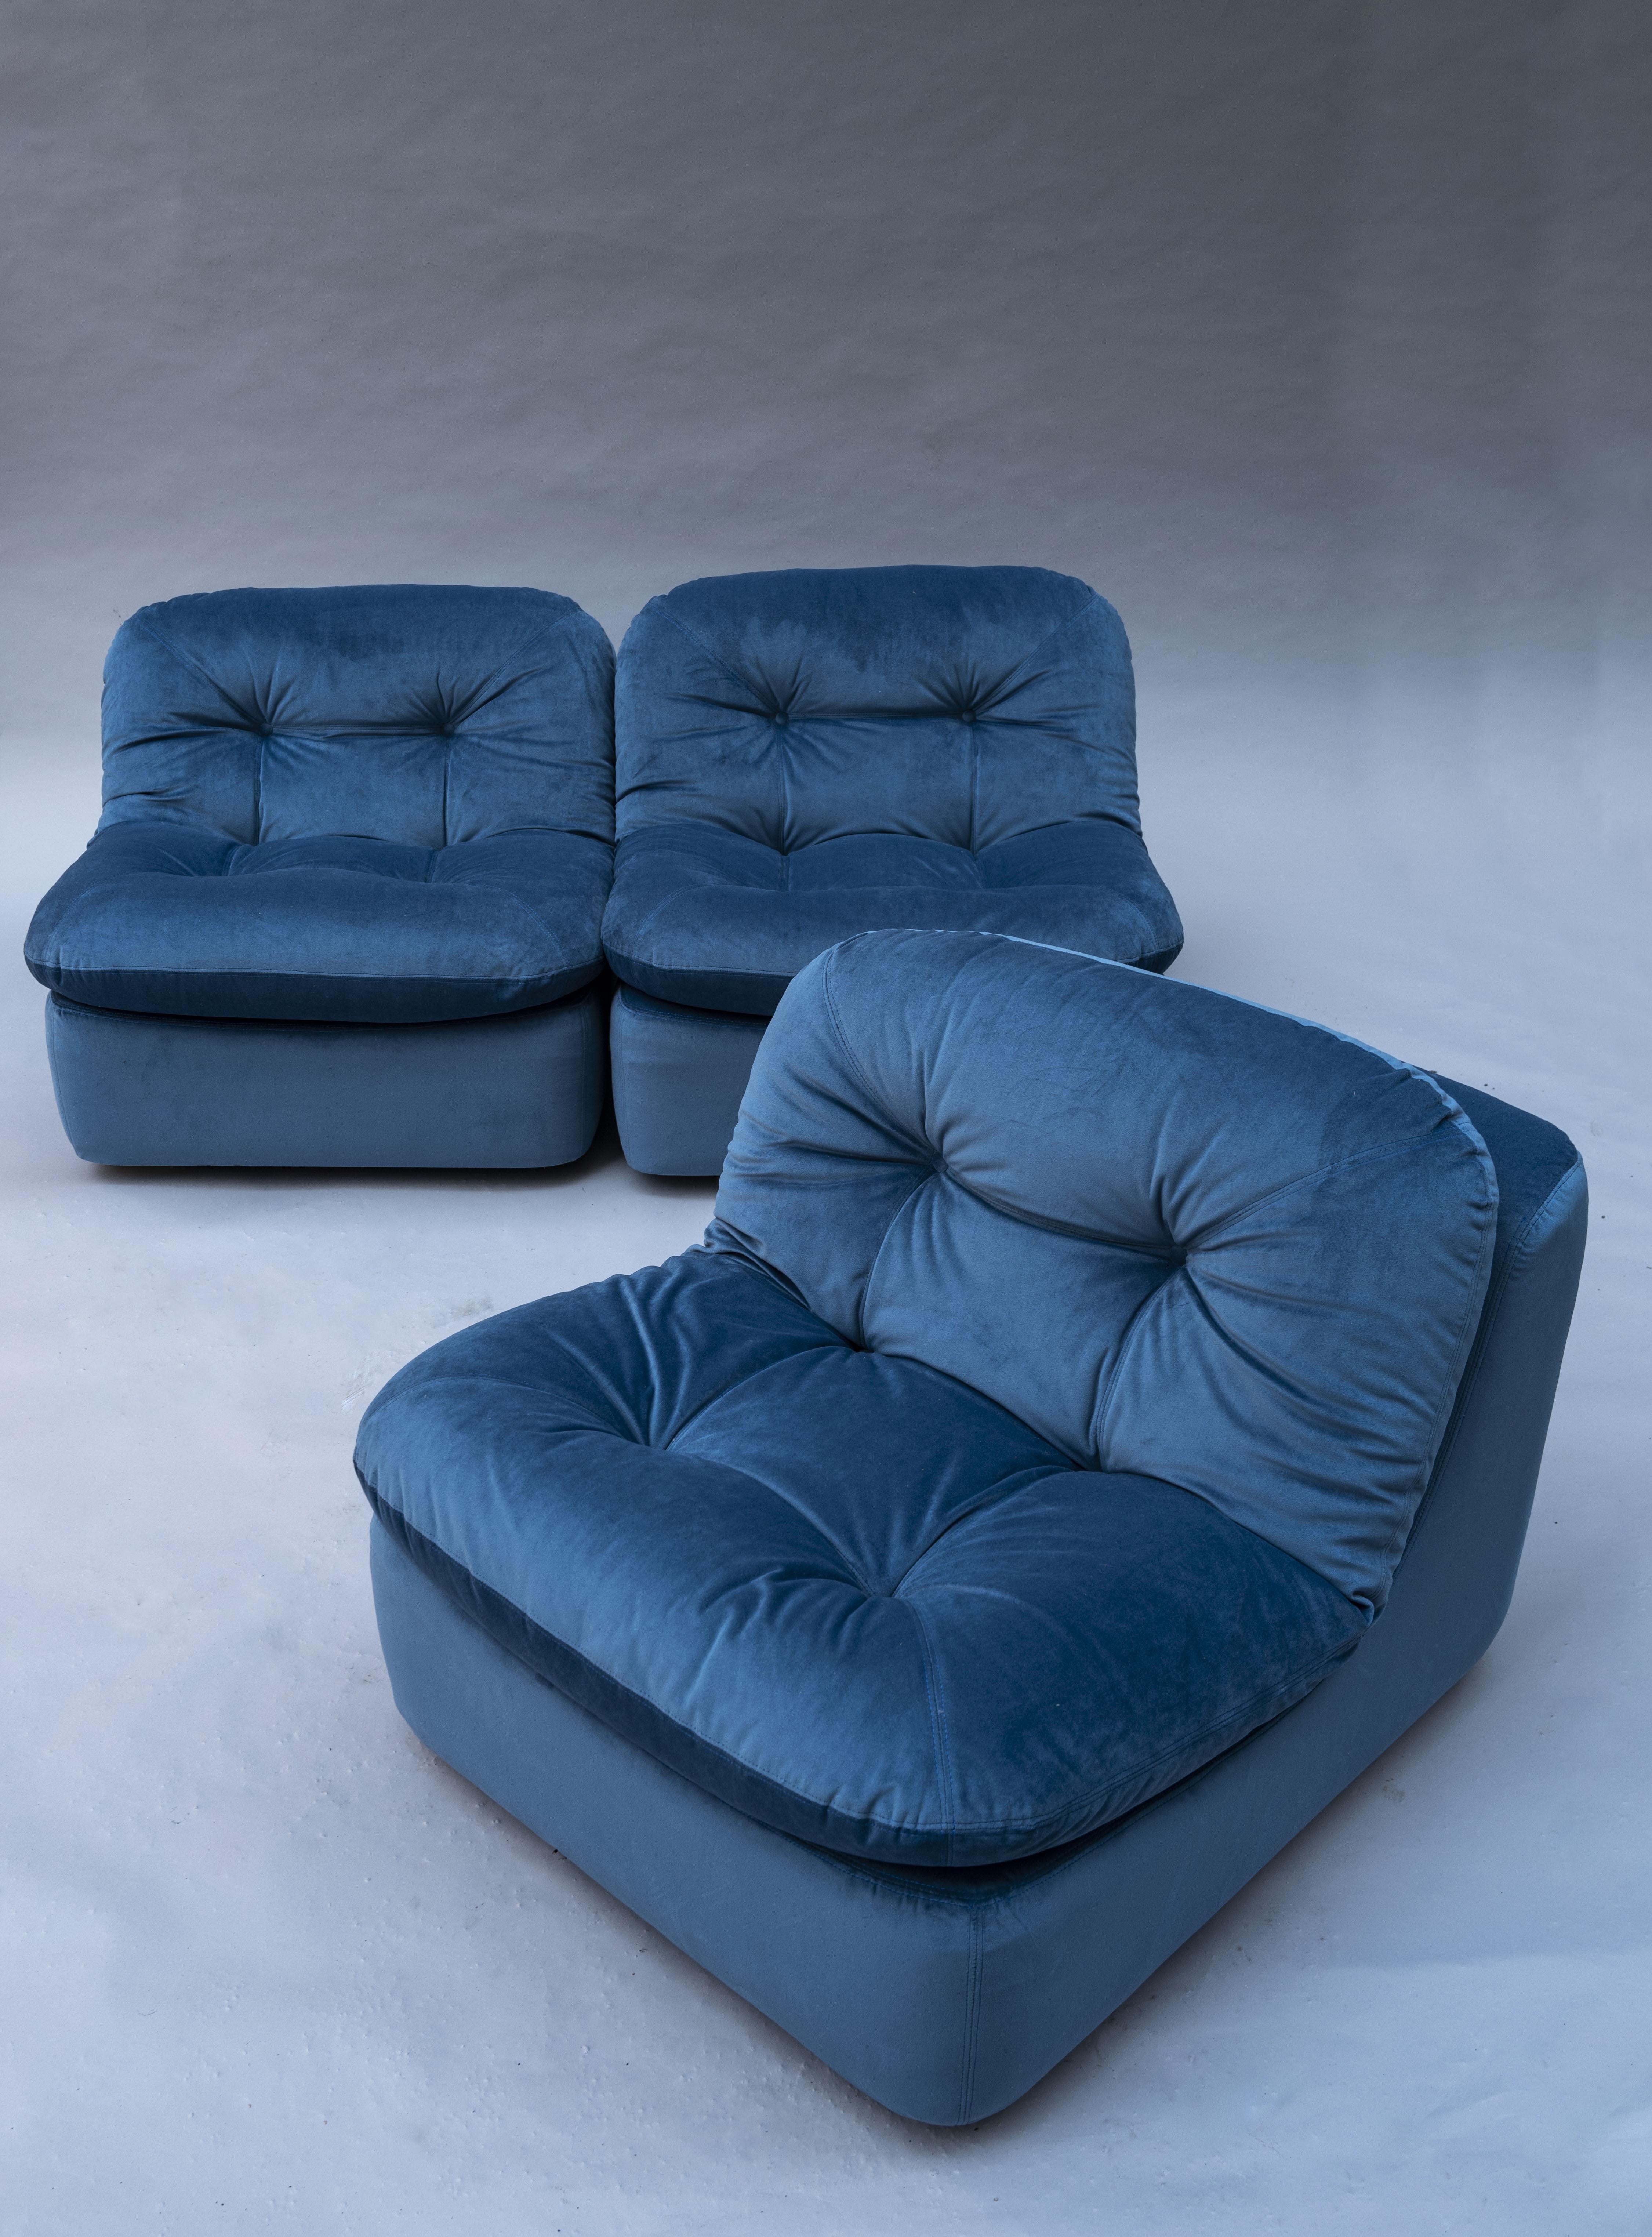 Set of three lounge chairs/modular sofa, Italy 1970s, entirely renovated and newly reupholstered
in a velvet by Sanderson.